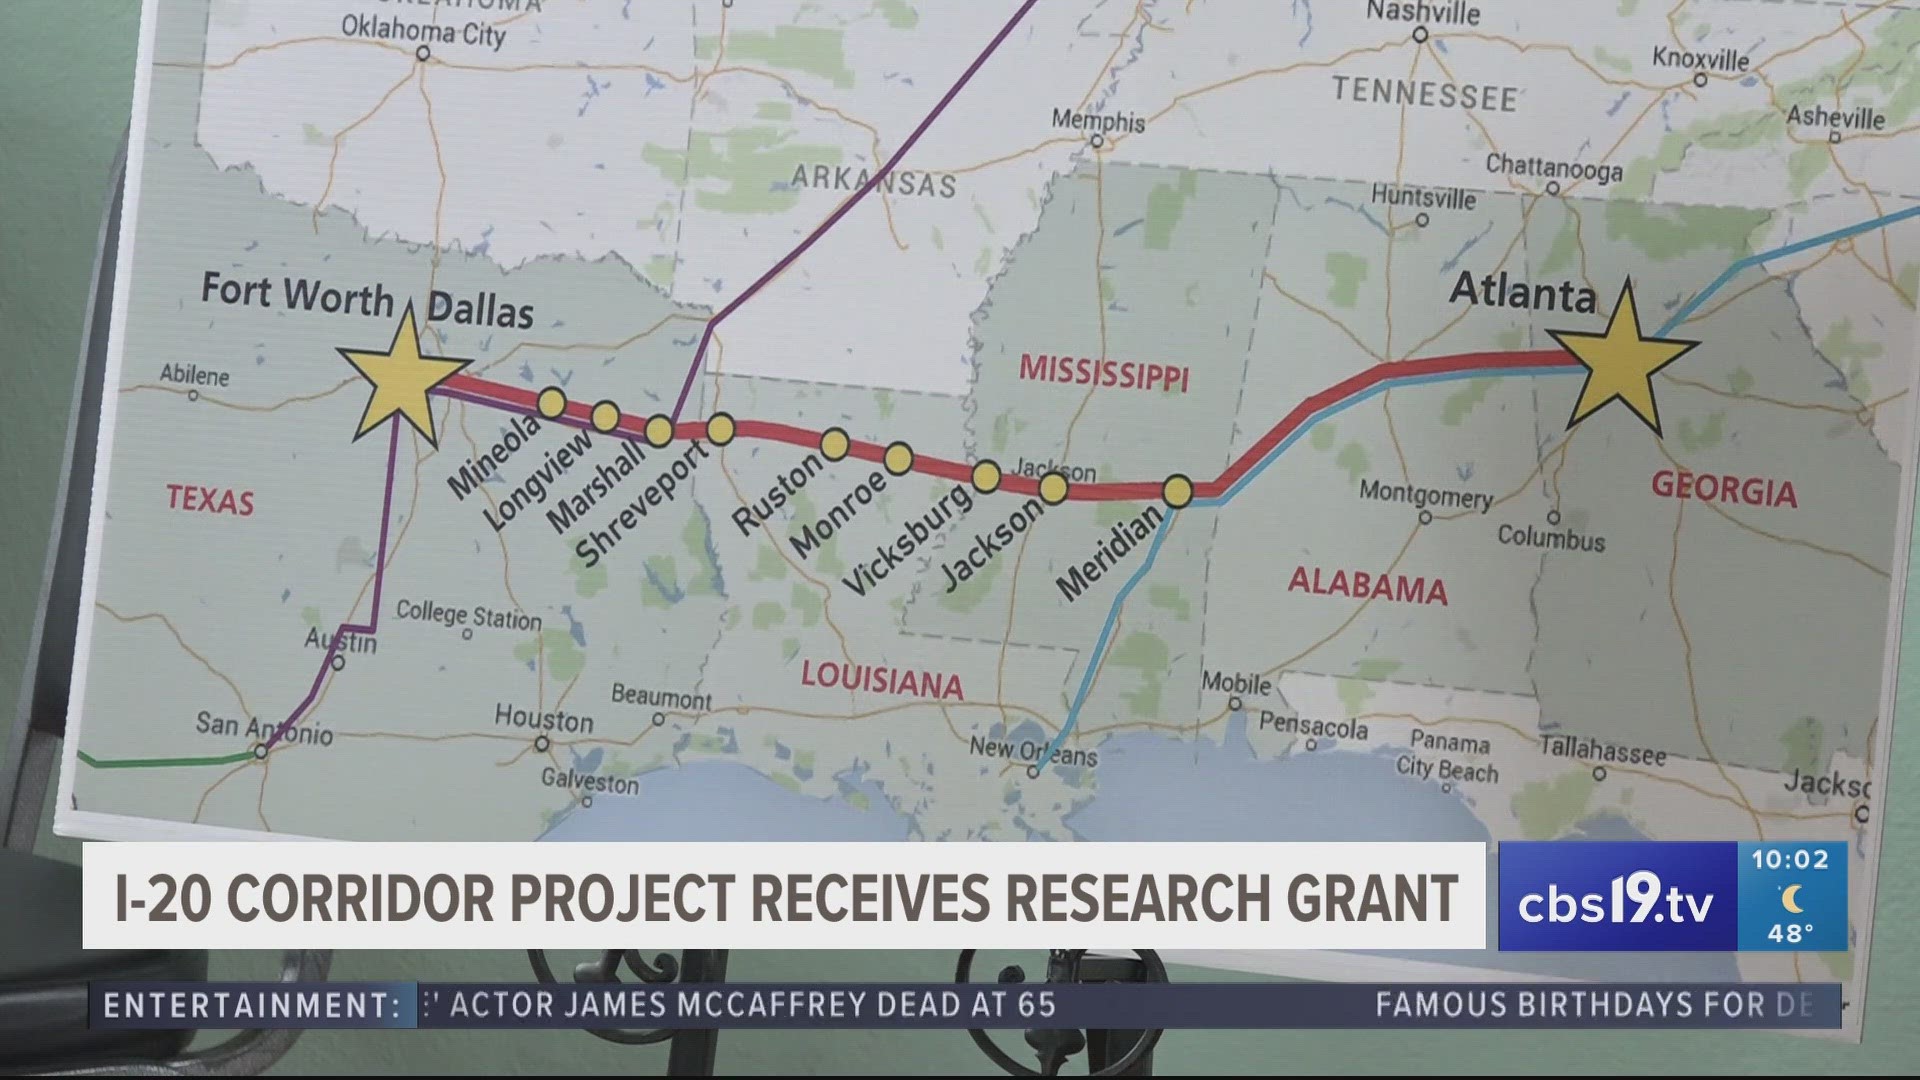 The East Texas Council of Governments announced the project that would connect Dallas/Fort Worth to Atlanta, Georgia is now under a federal program for research.